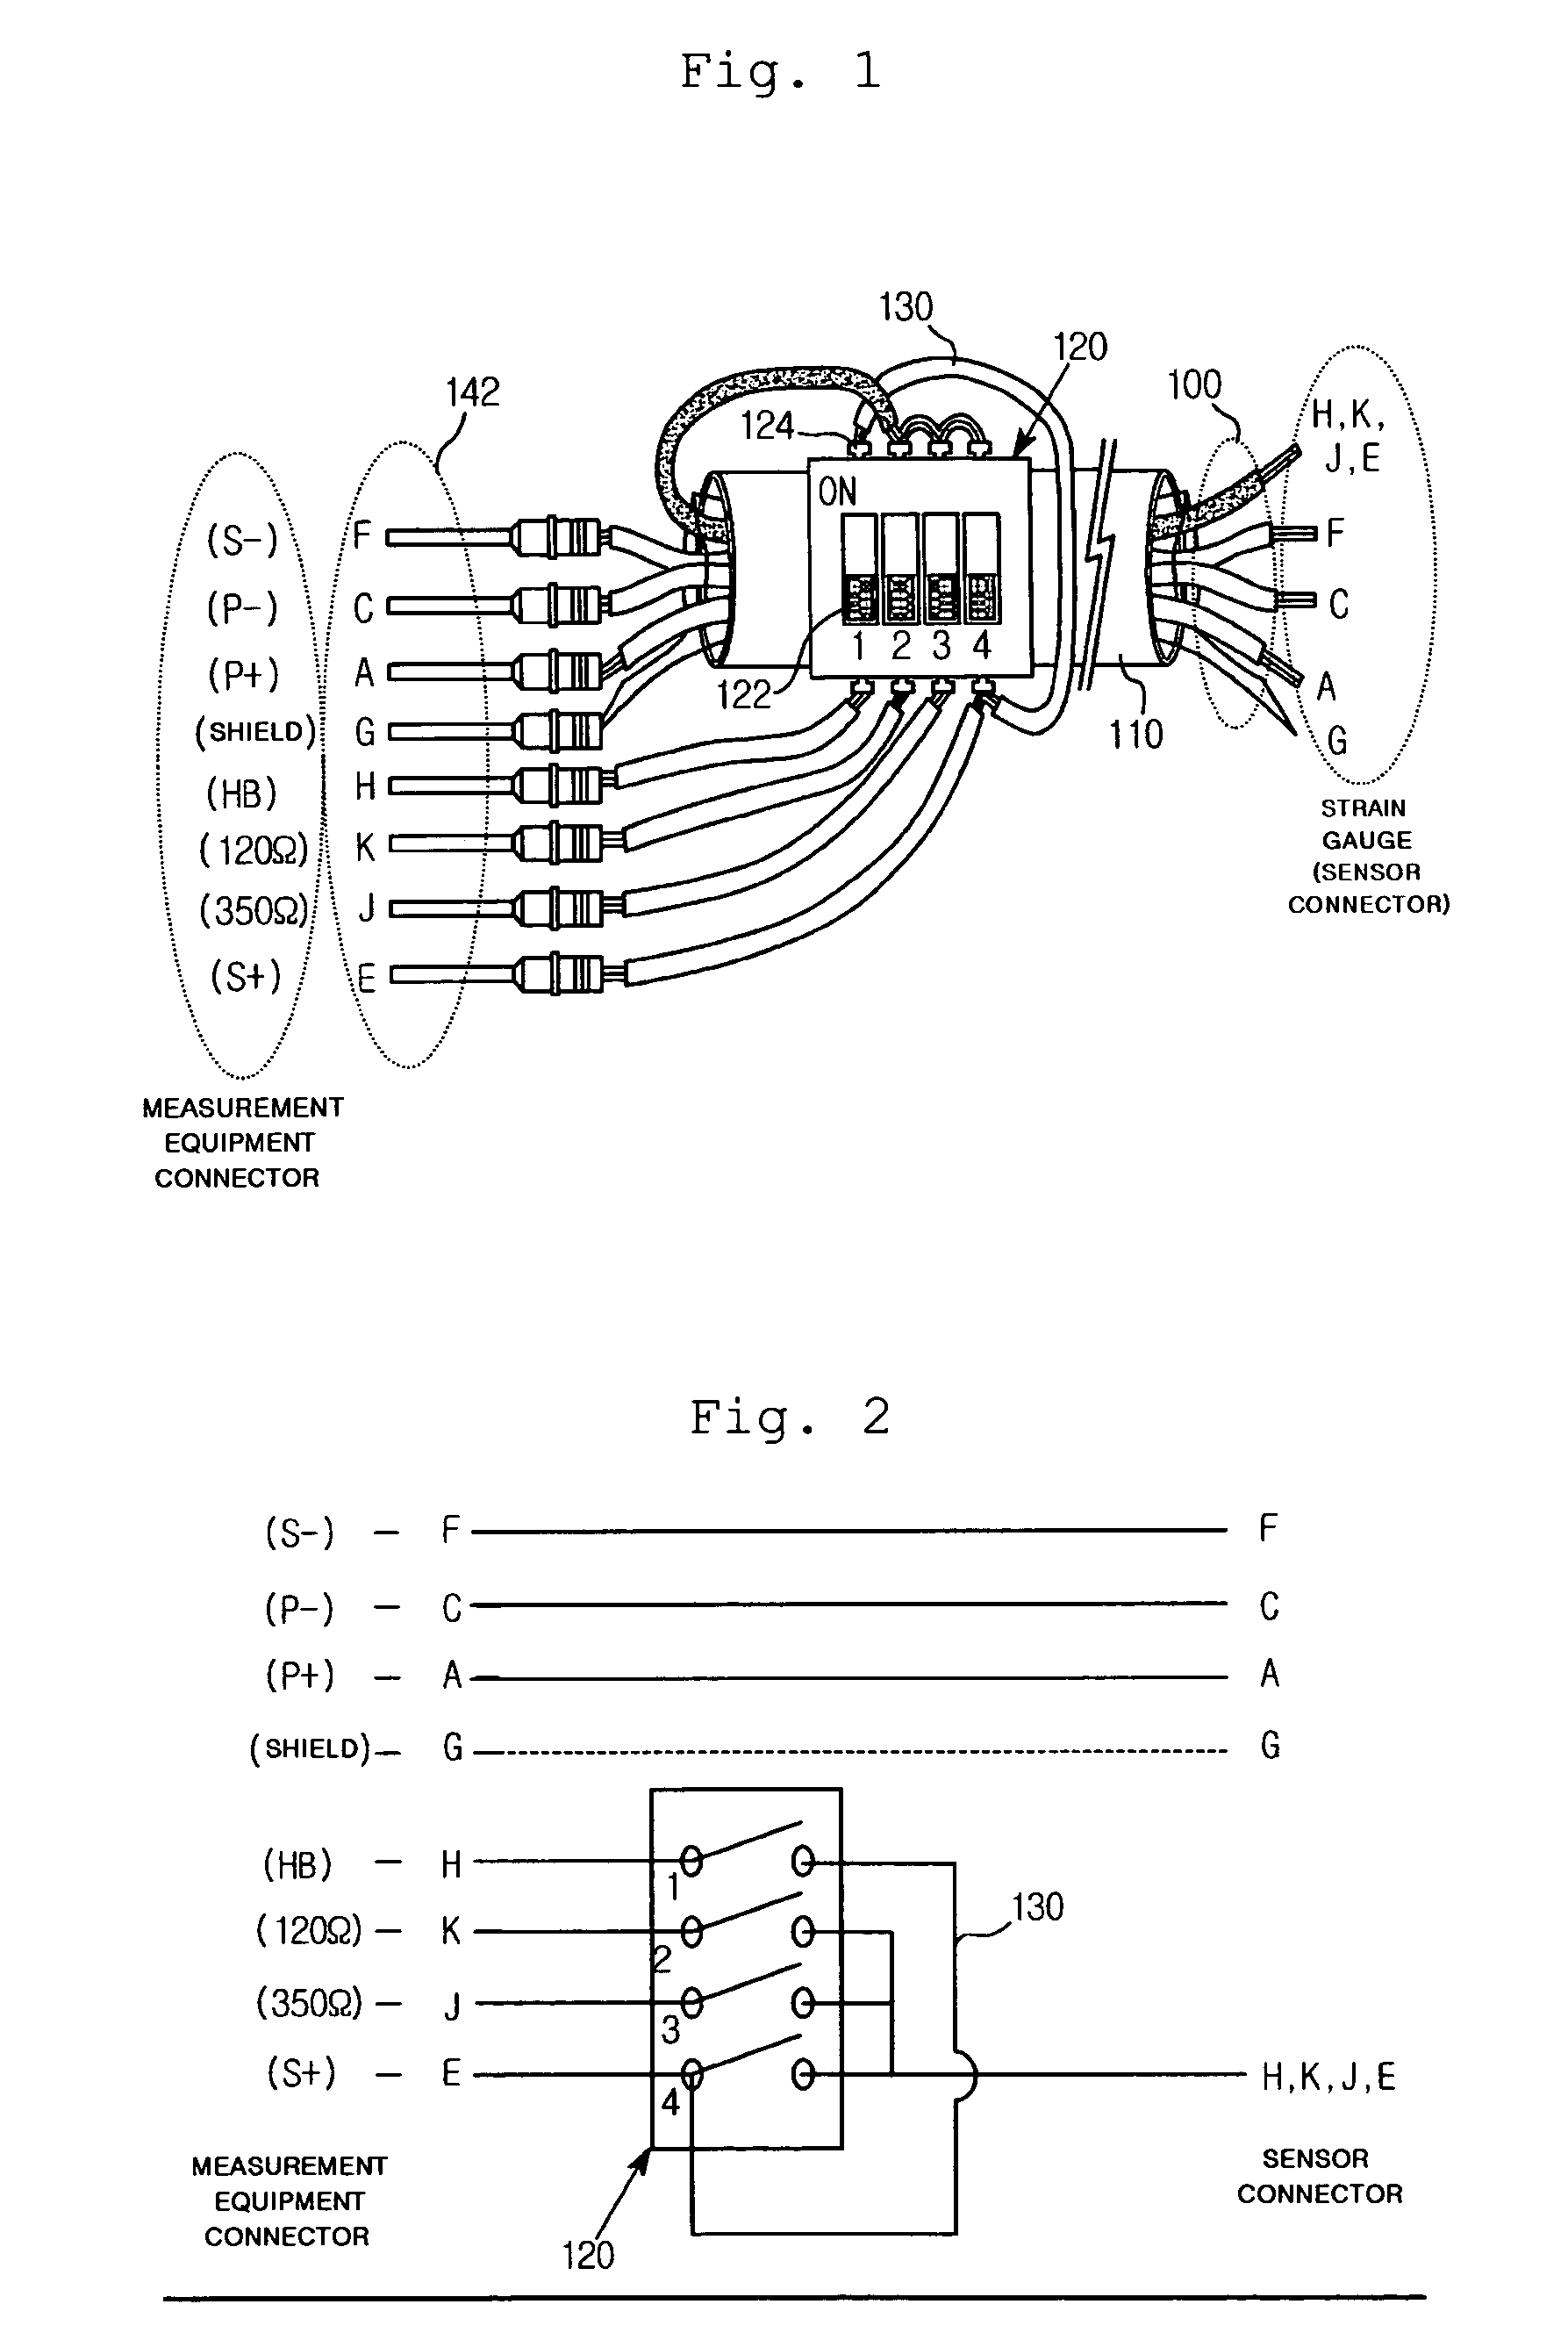 Cable connector for selective wiring